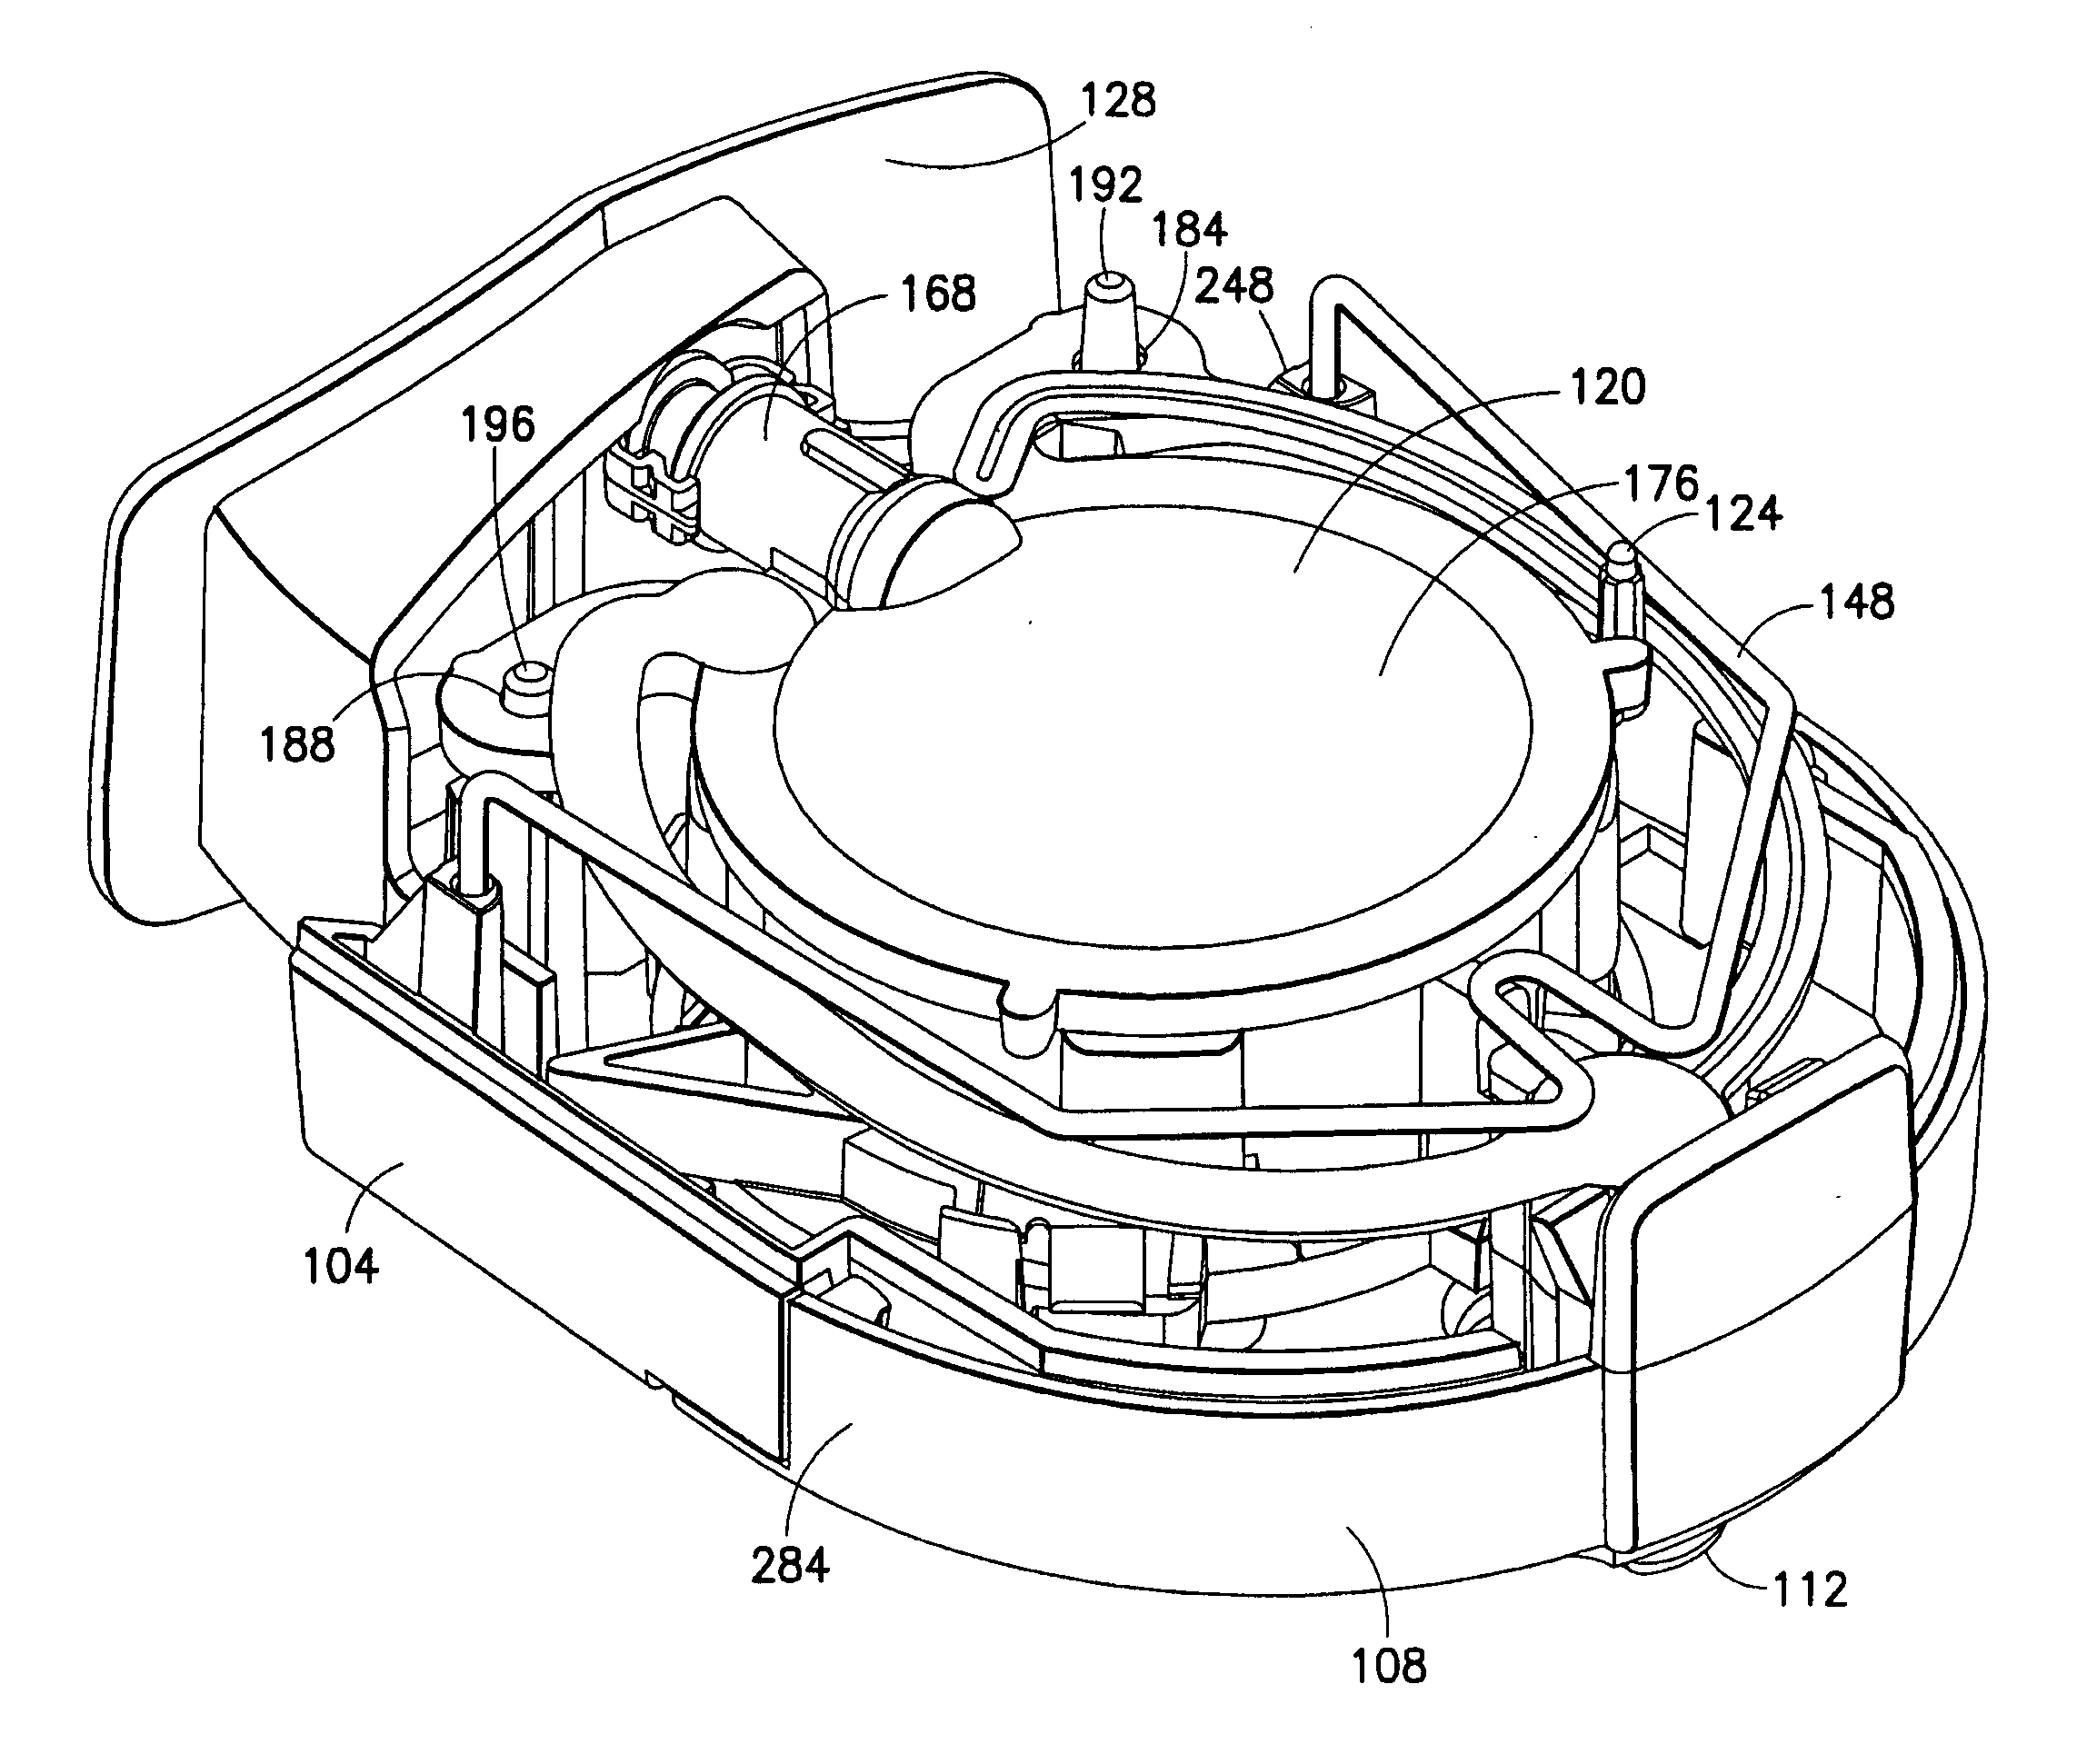 Self-Injection Device